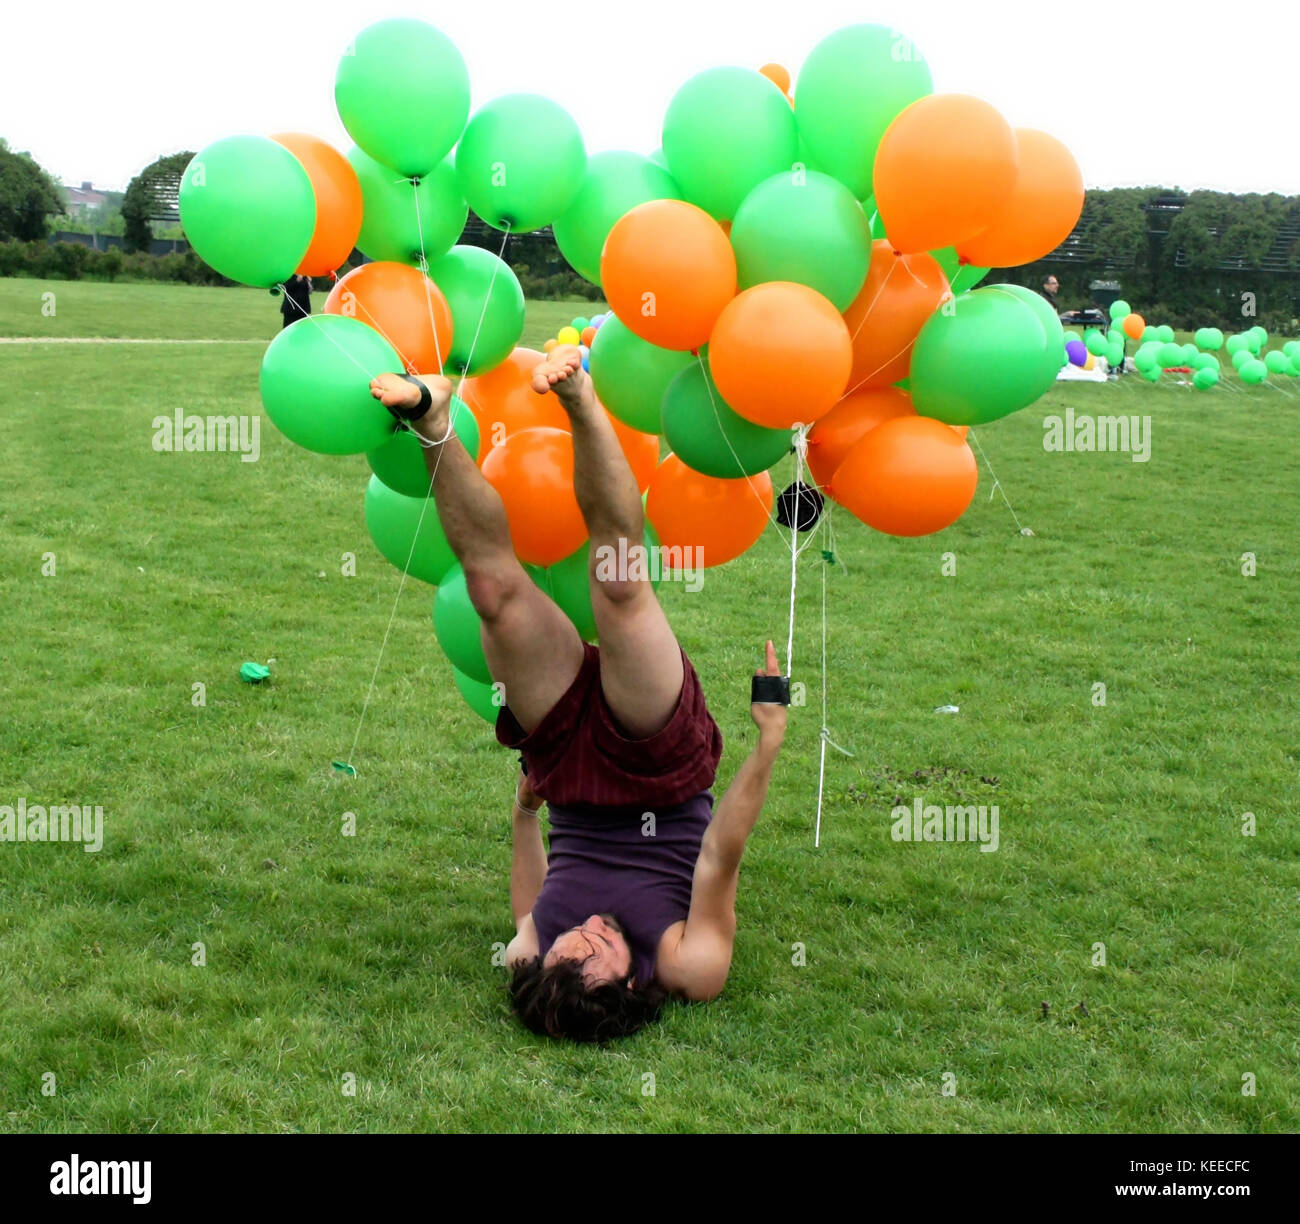 strange performance with colored balloons Stock Photo